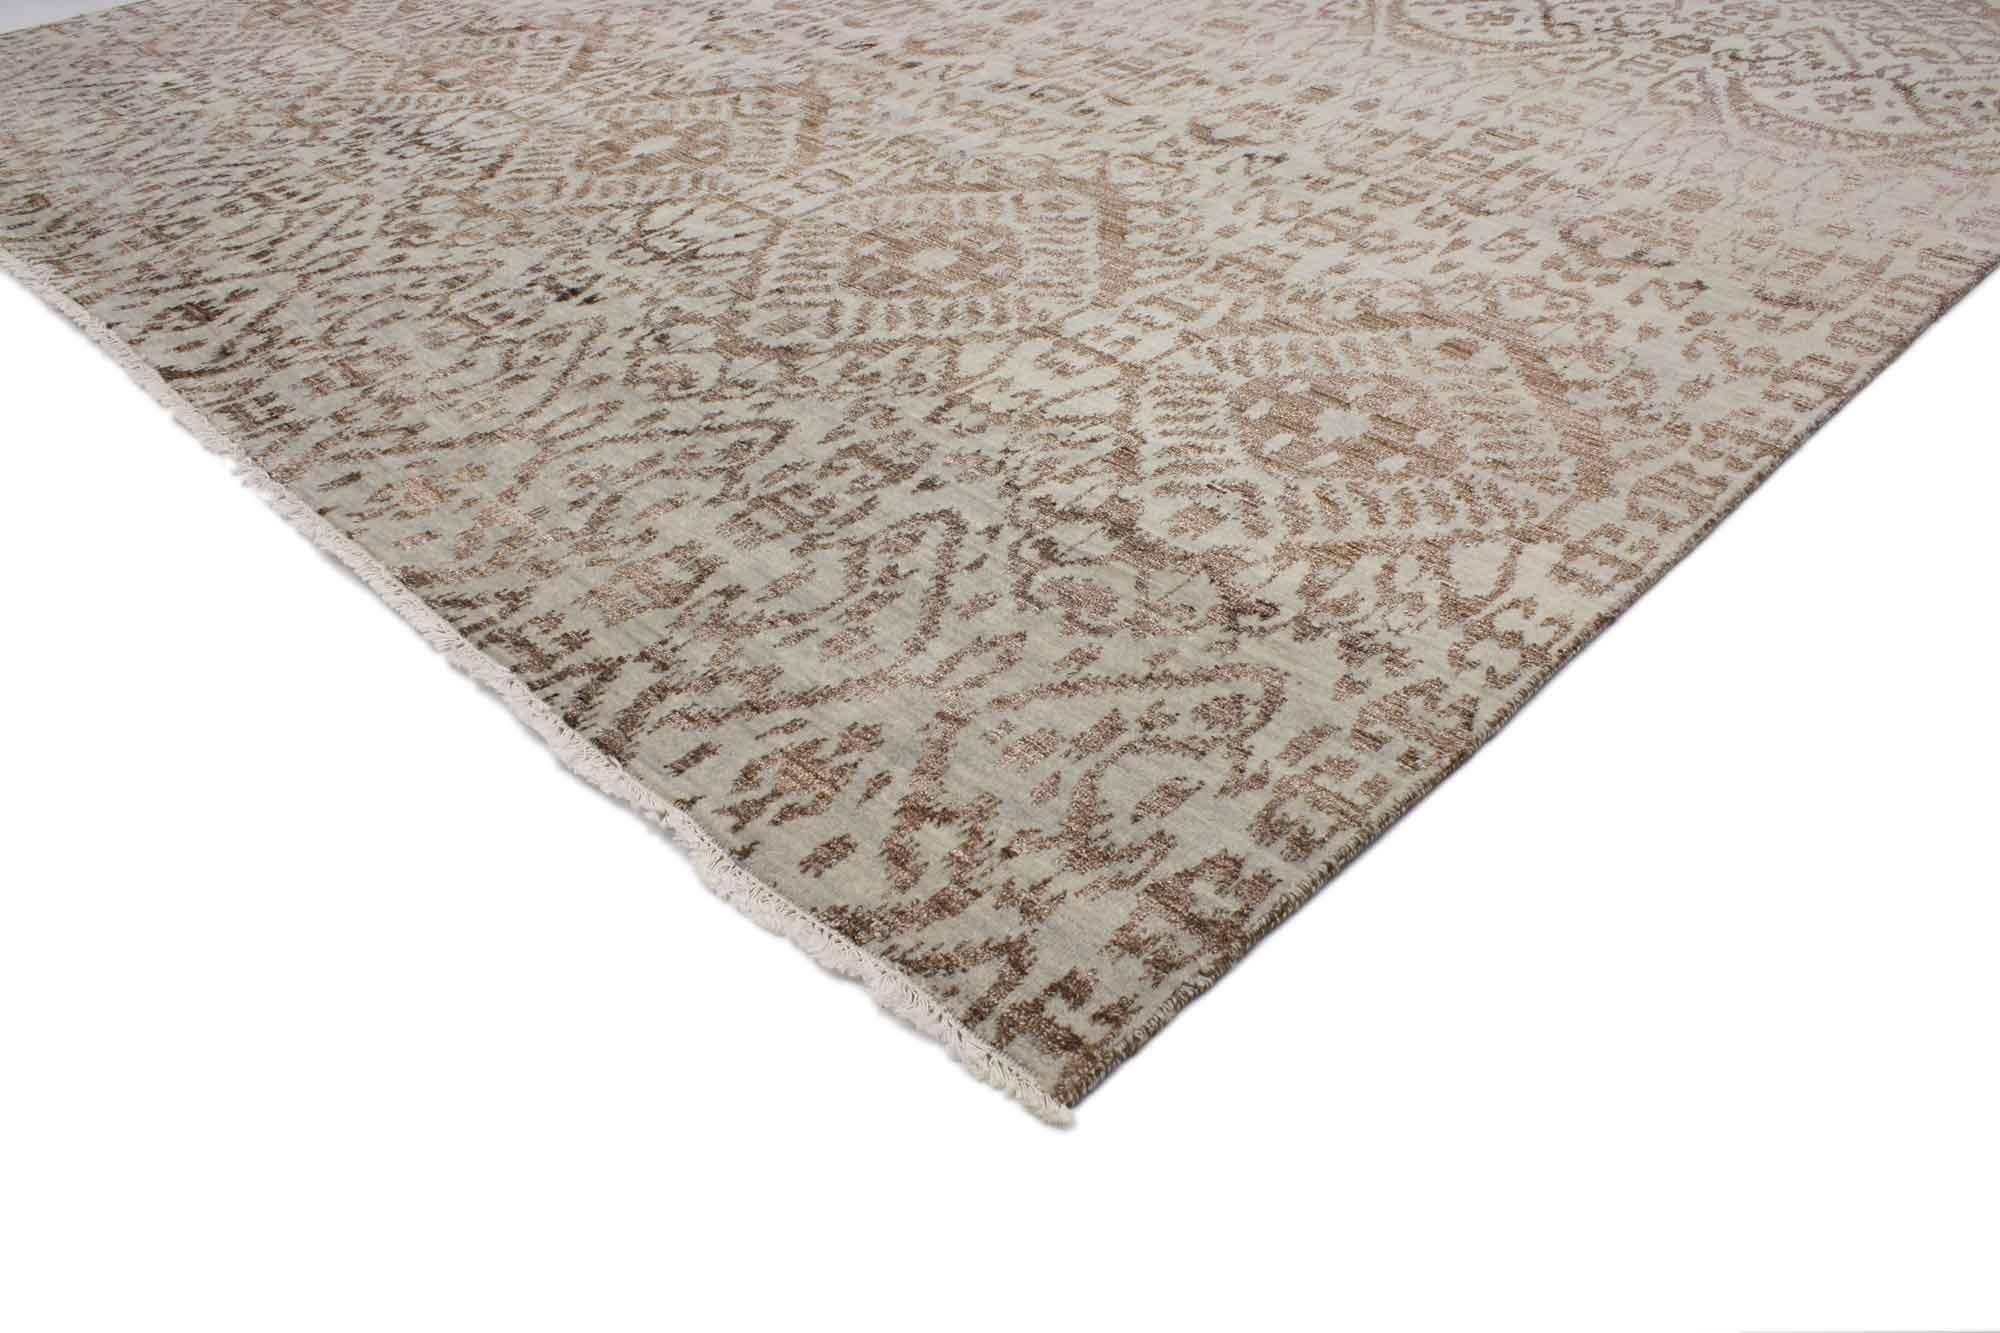 30328 New Transitional Ikat Area rug with Modern Style, Wool and Silk Ikat Rug 09'00 x 12'00. Balancing a timeless design and neutral colors, this hand-knotted wool transitional Ikat area rug beautifully displays modern style. The abrashed light